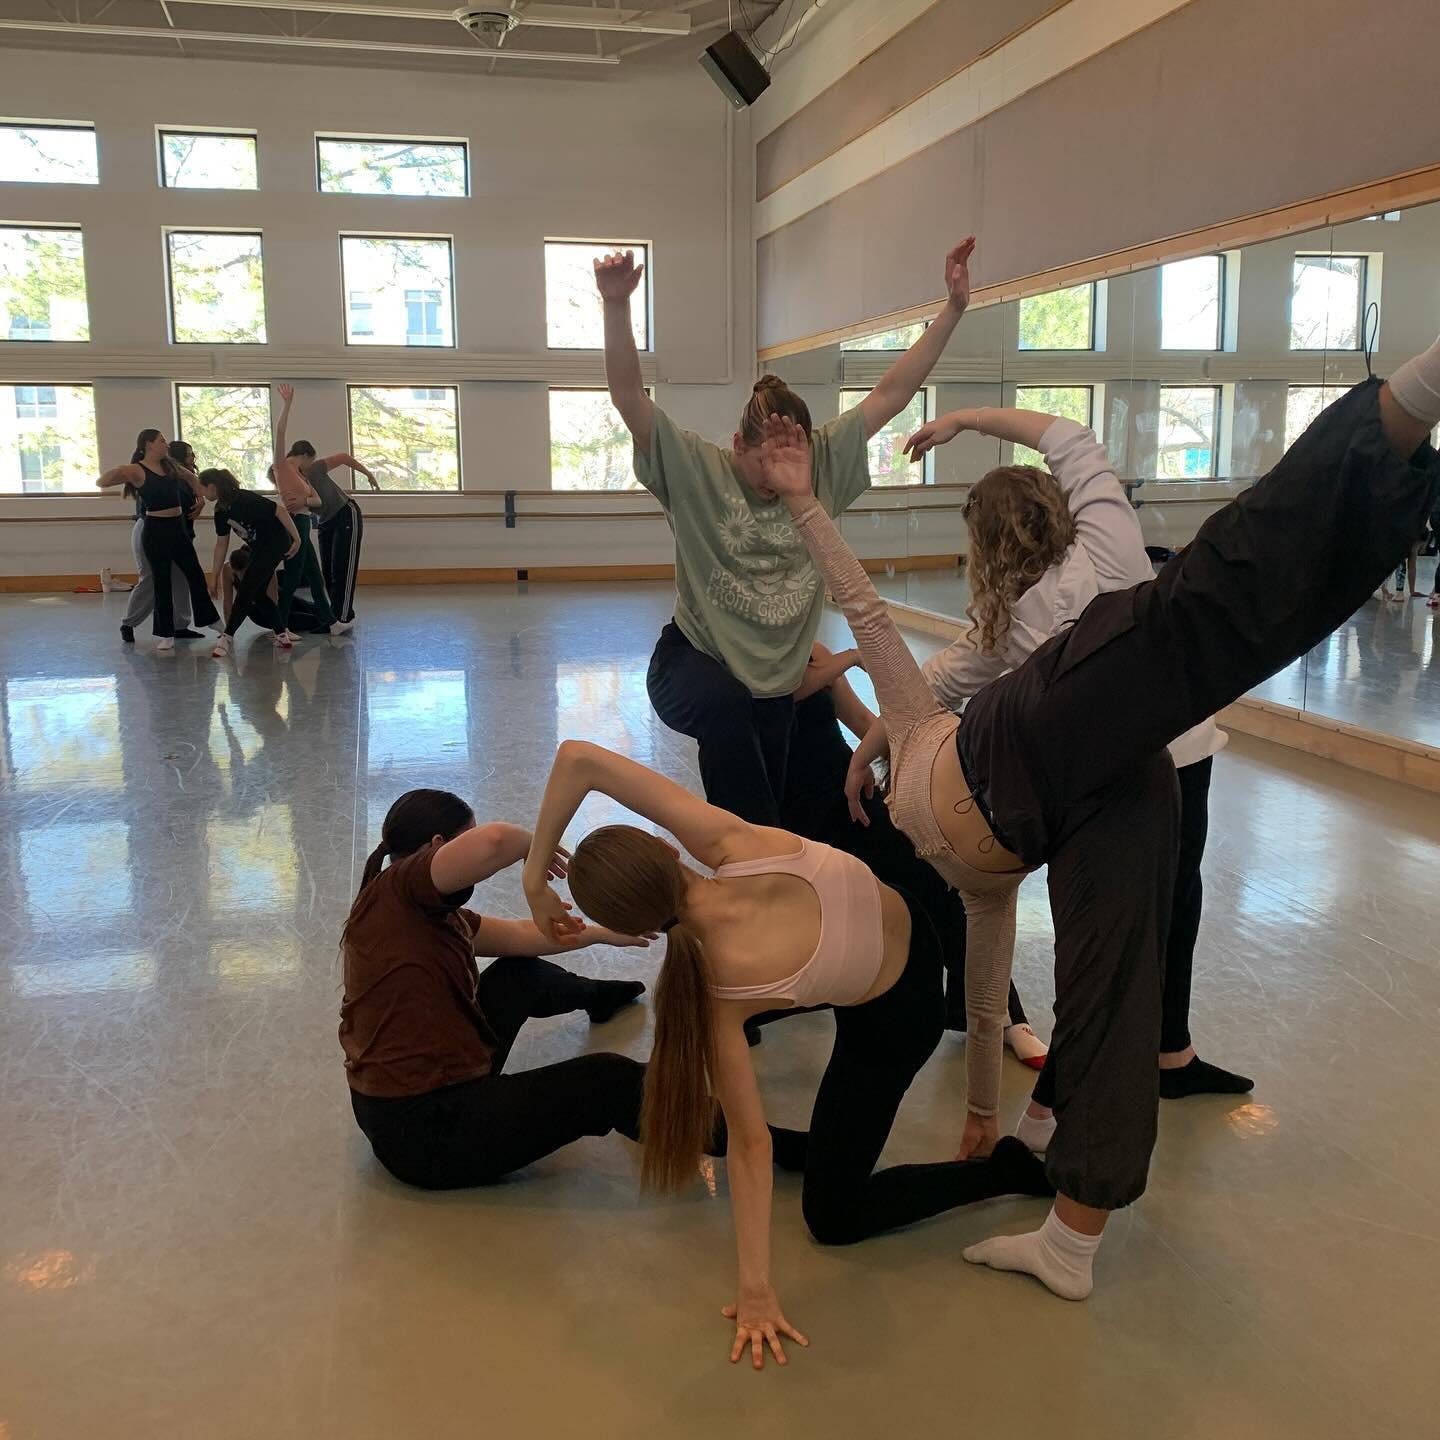 High School Dance Day 2024 ✨

Thank you to everybody who participated! The School of Dance hosts the High School Dance Day multiple times during the academic year giving high school students the chance to take a contemporary dance class with U of U f